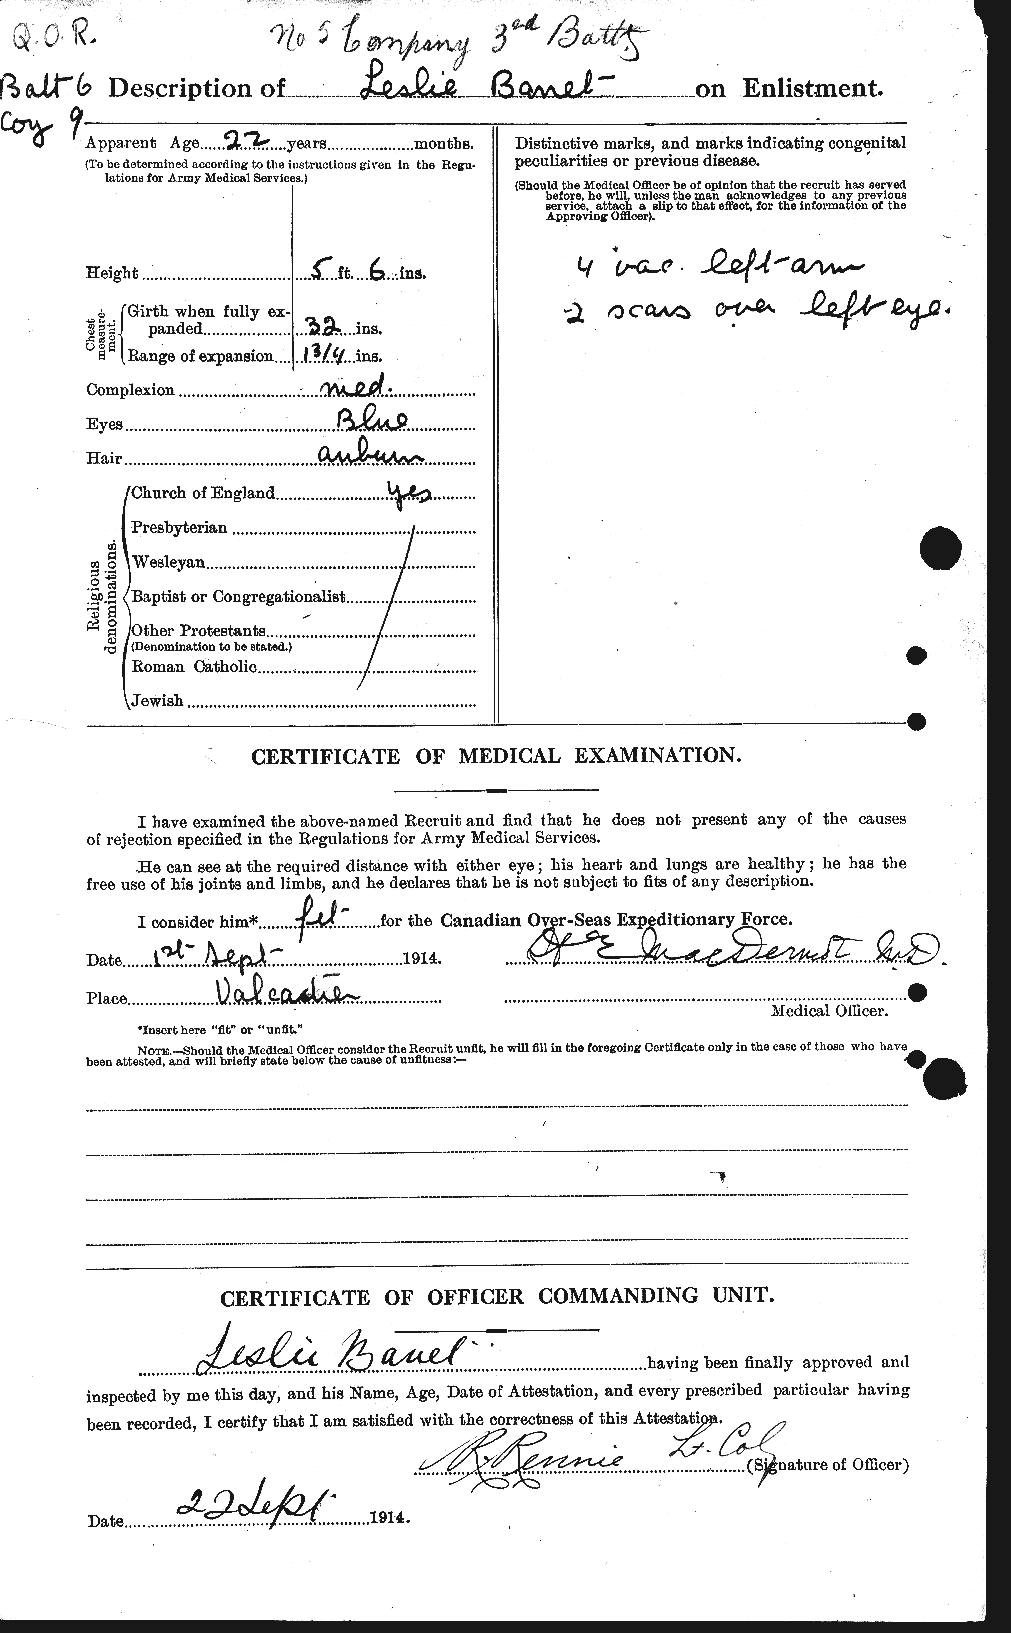 Personnel Records of the First World War - CEF 220222b